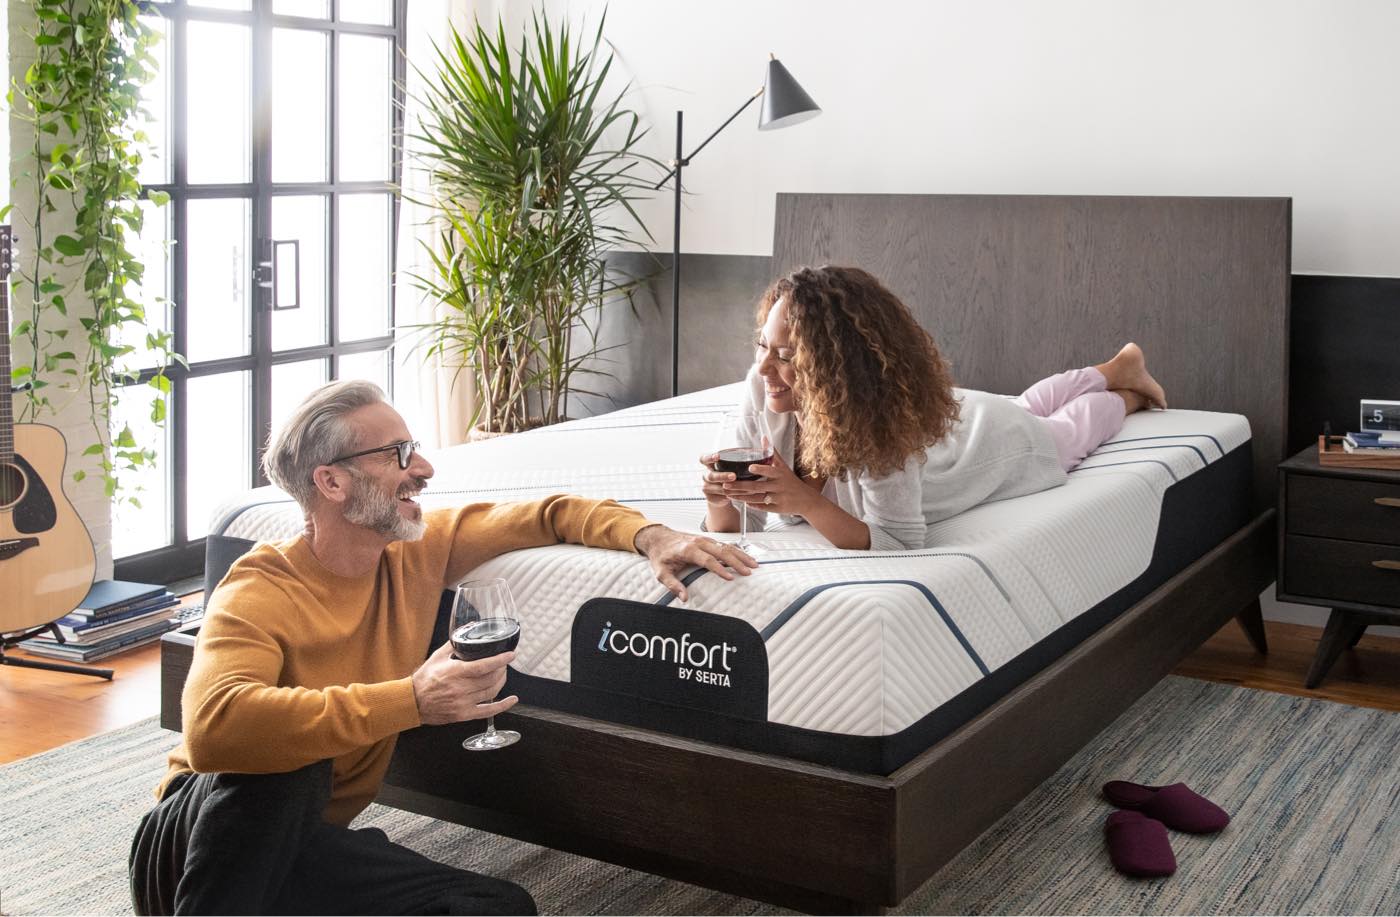 A man and woman drinking wine on an iComfort mattress in a bedroom